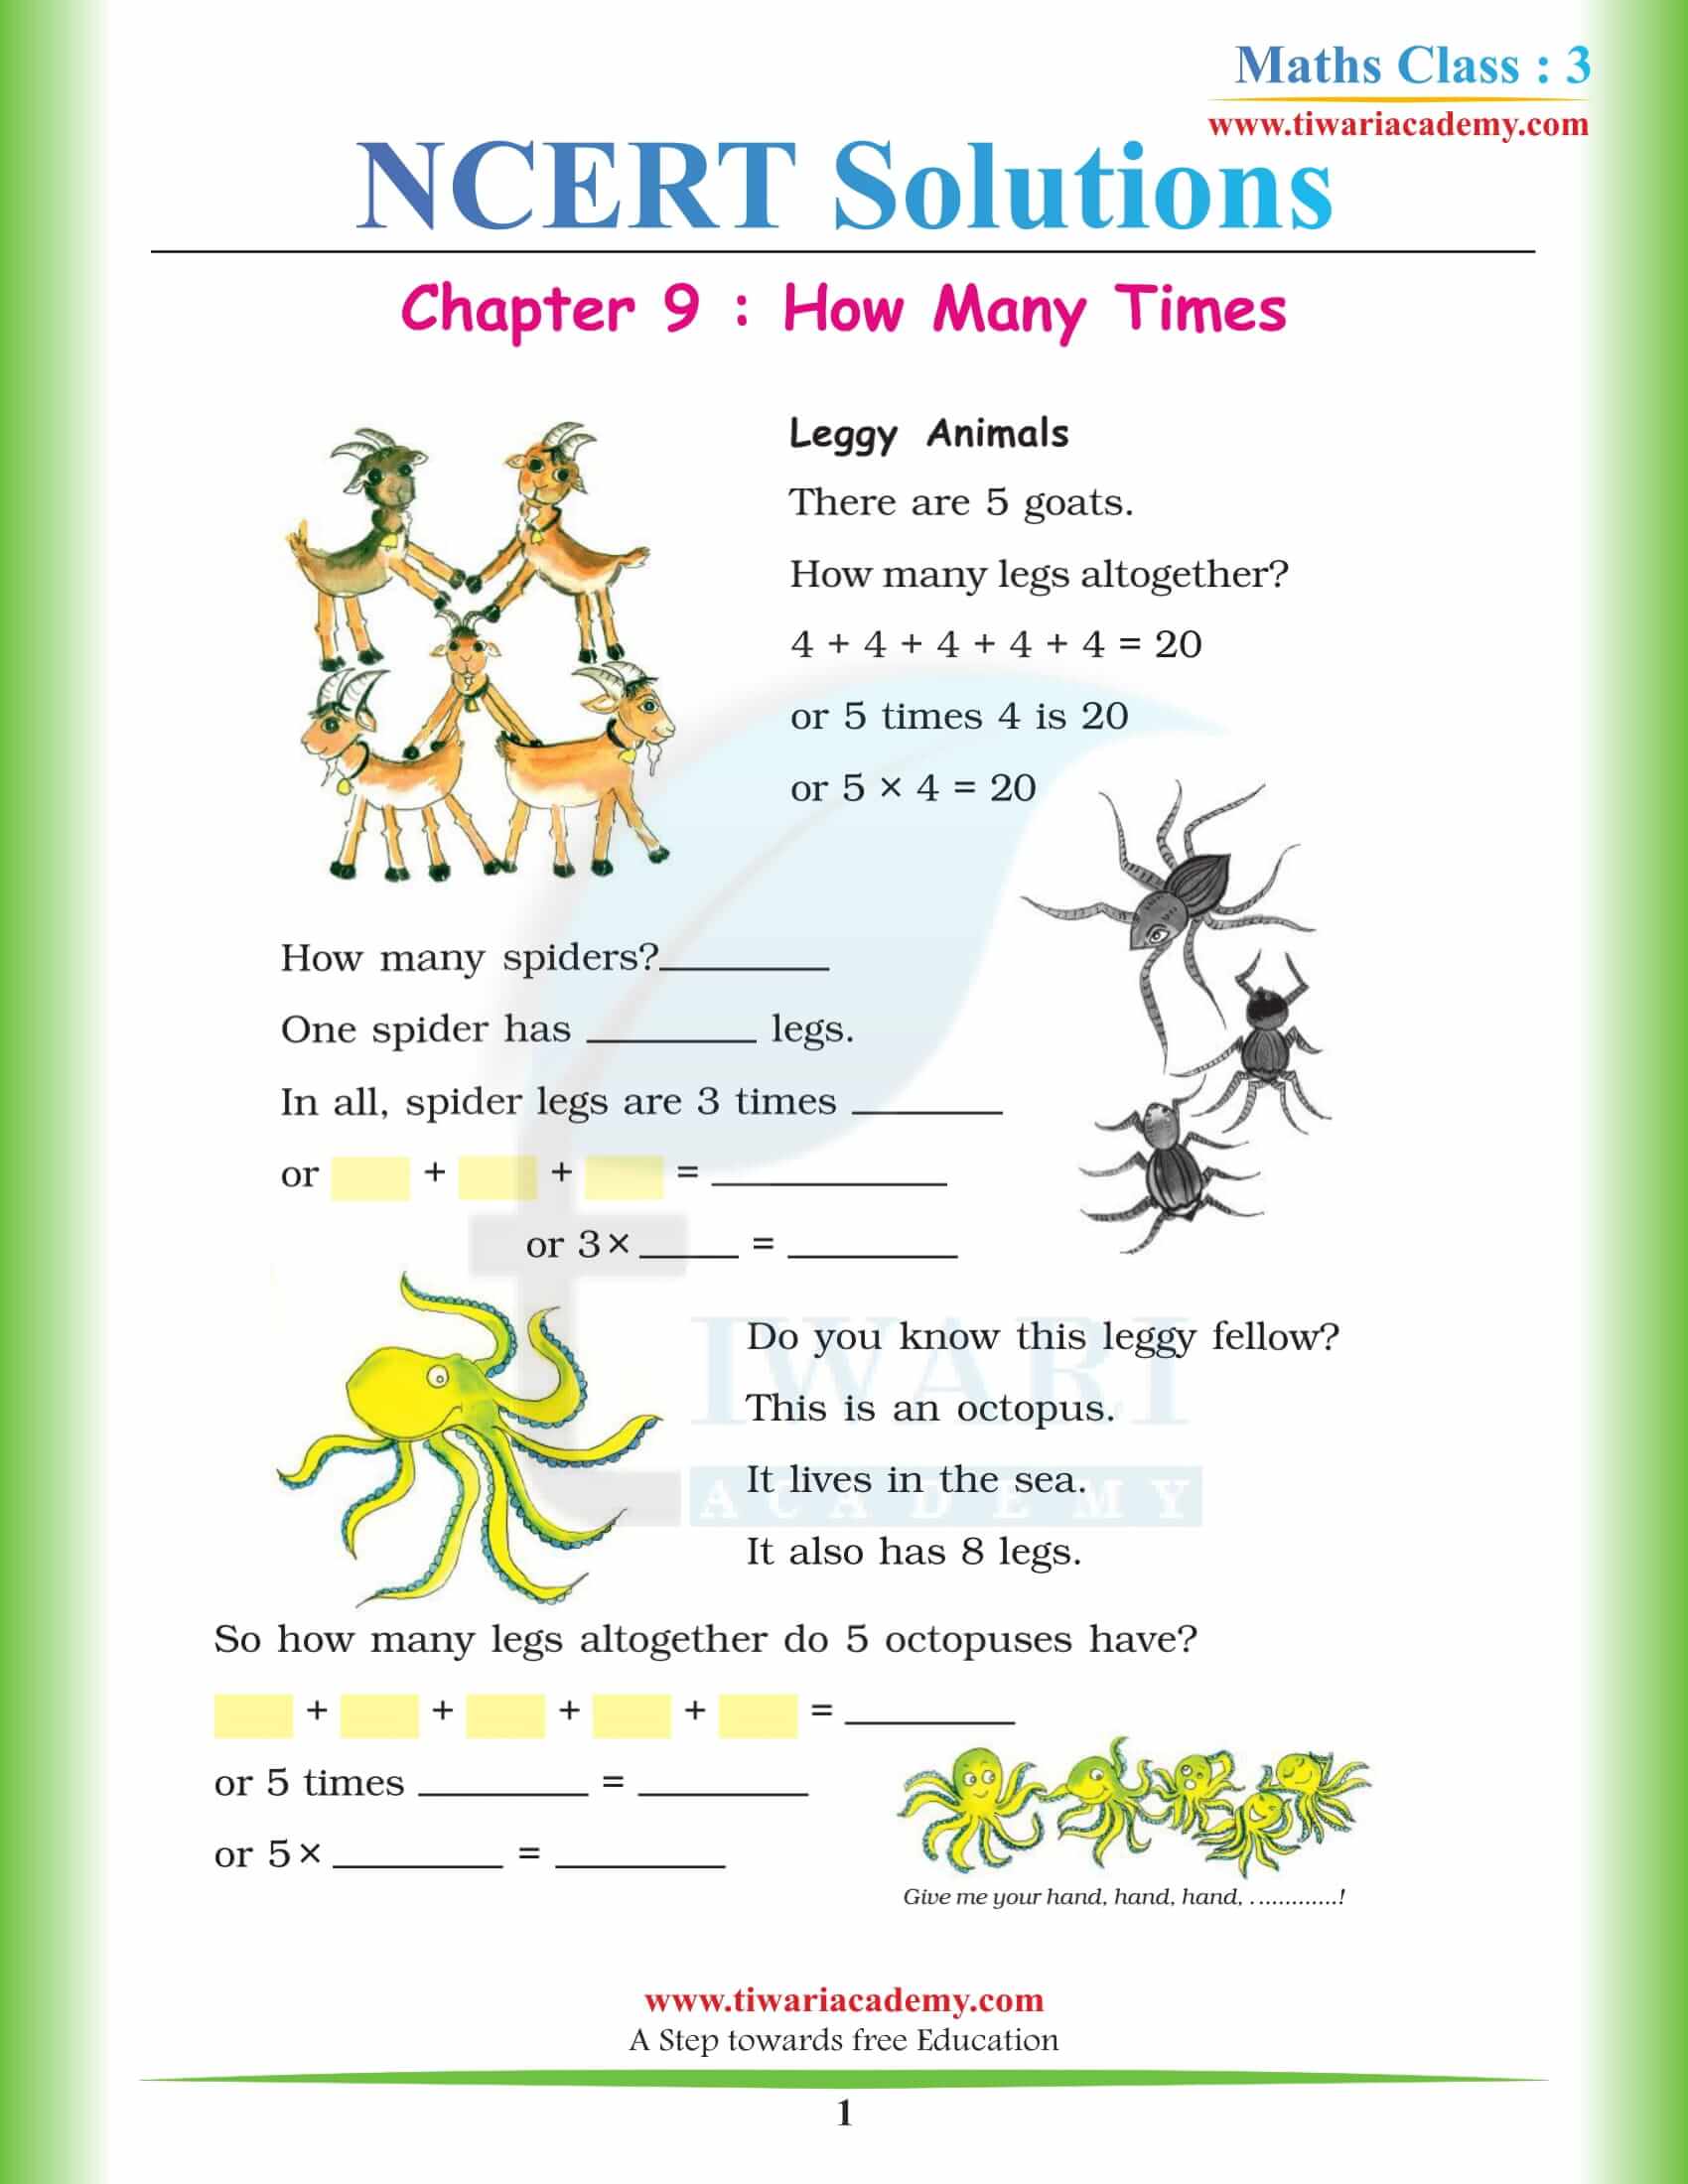 NCERT Solutions for Class 3 Maths Chapter 9 How Many Times?